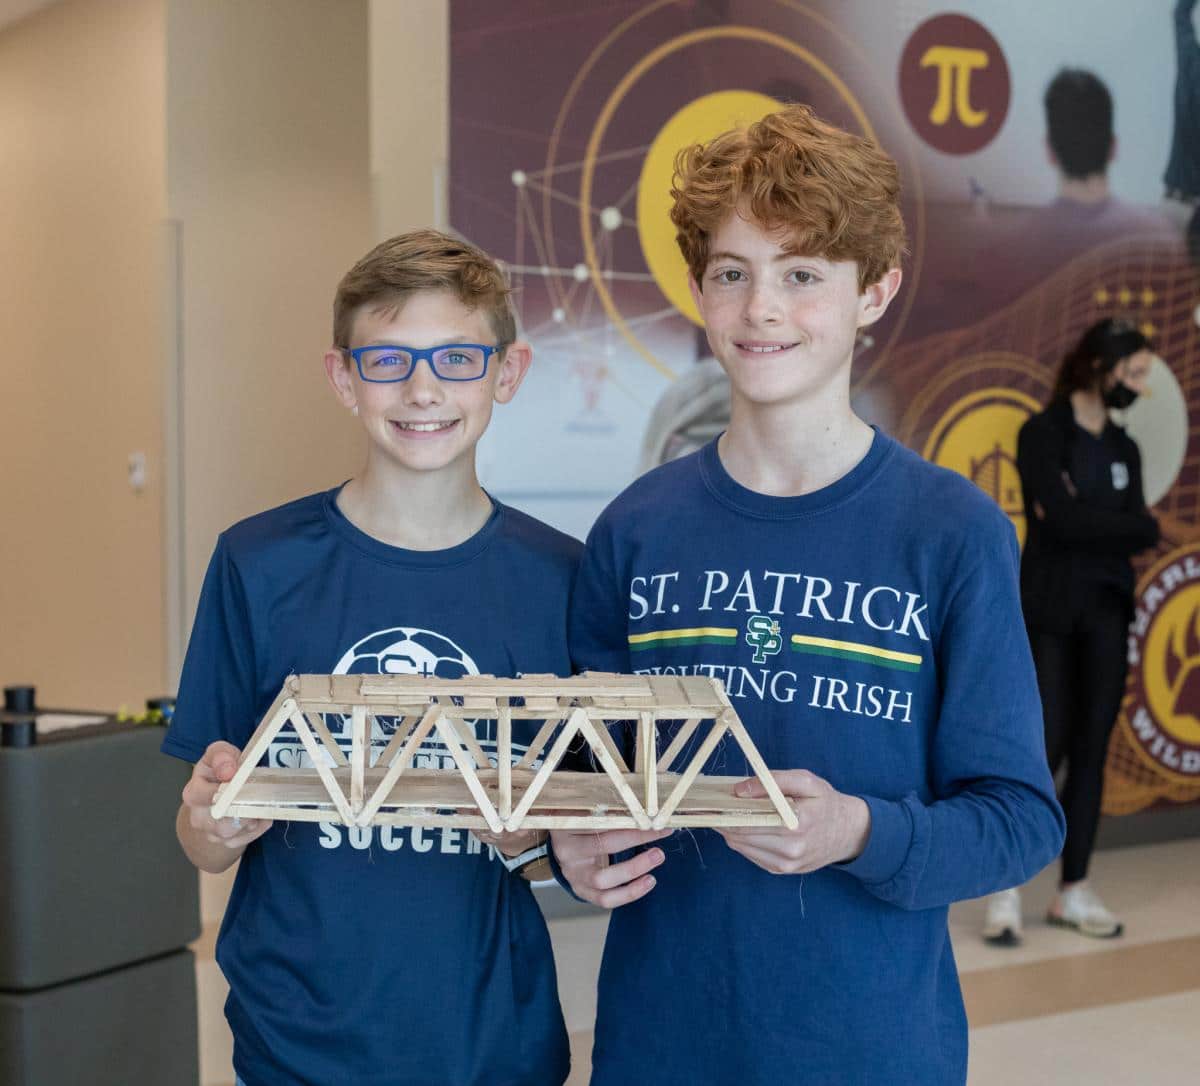 David Merrel and Connor McElroy from St. Patrick team with their bridge